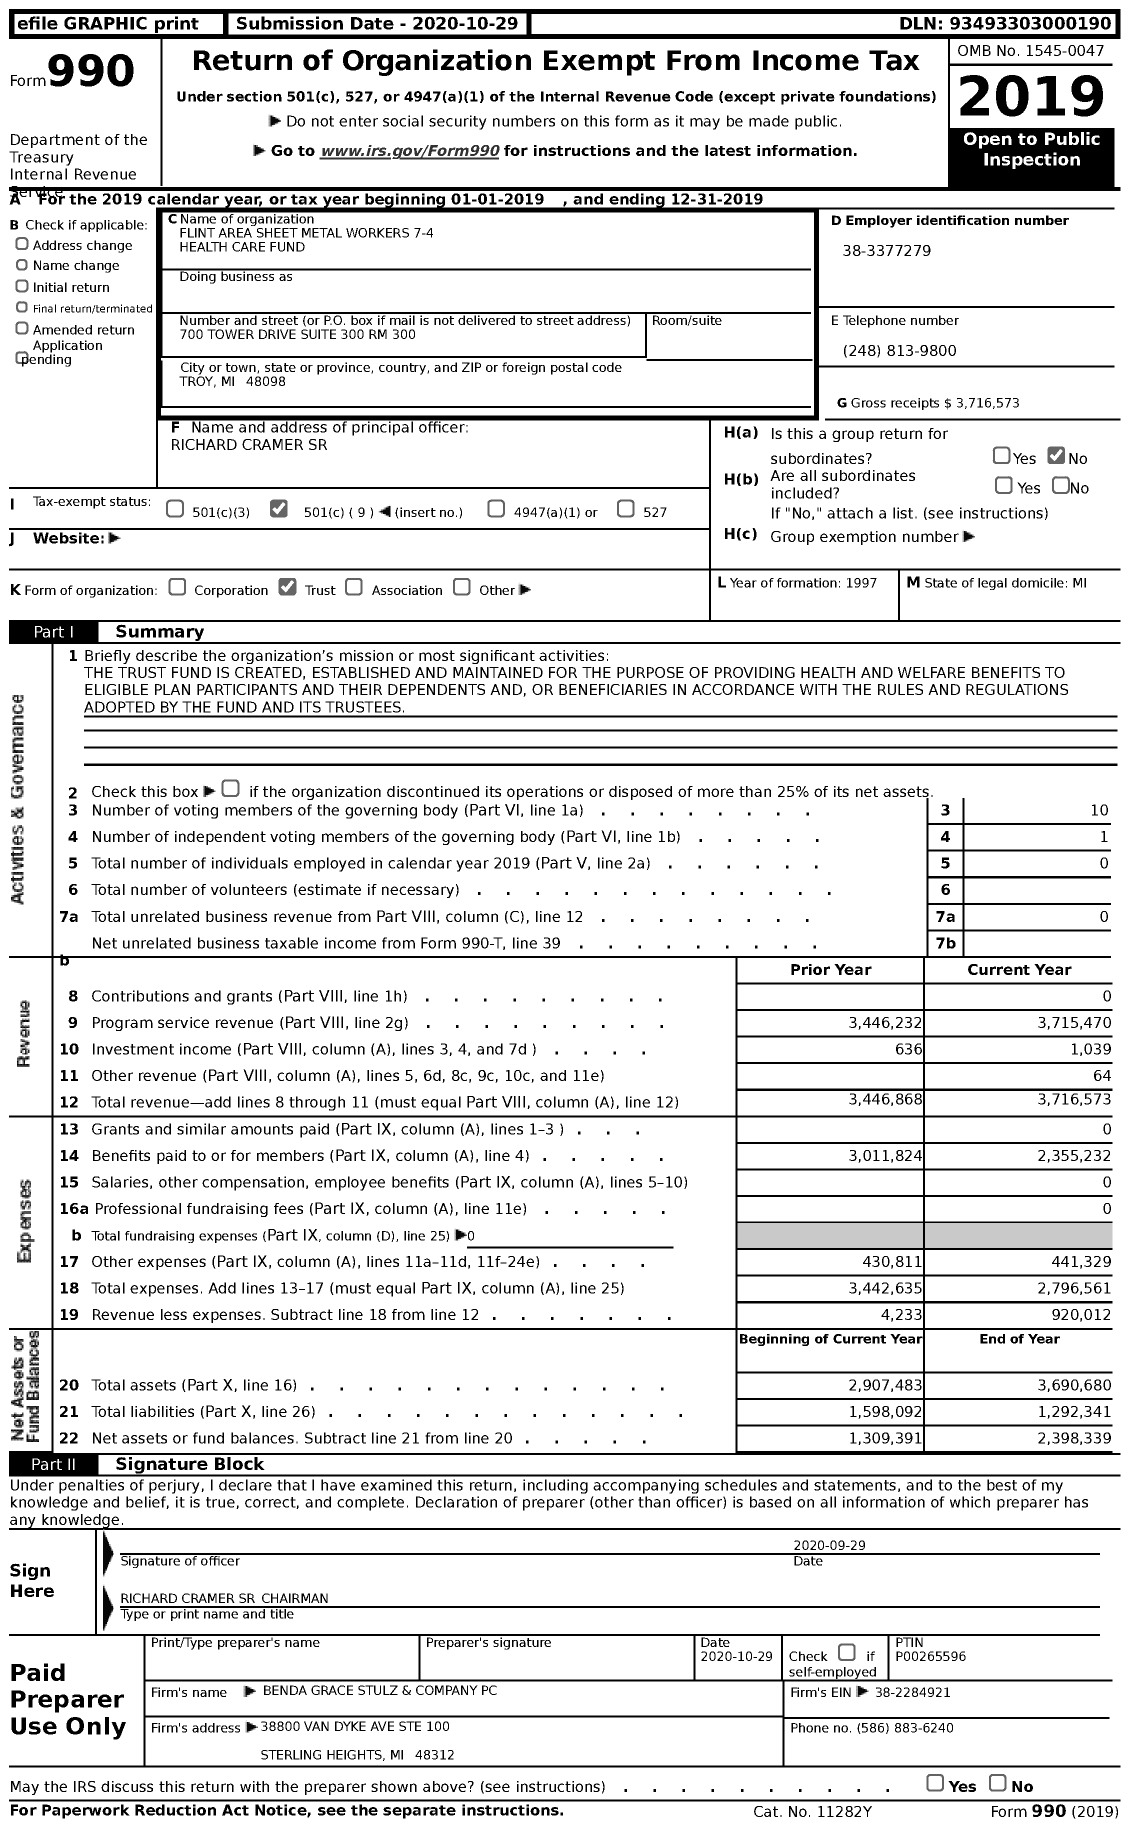 Image of first page of 2019 Form 990 for Flint Area Sheet Metal Workers 7-4 Health Care Fund